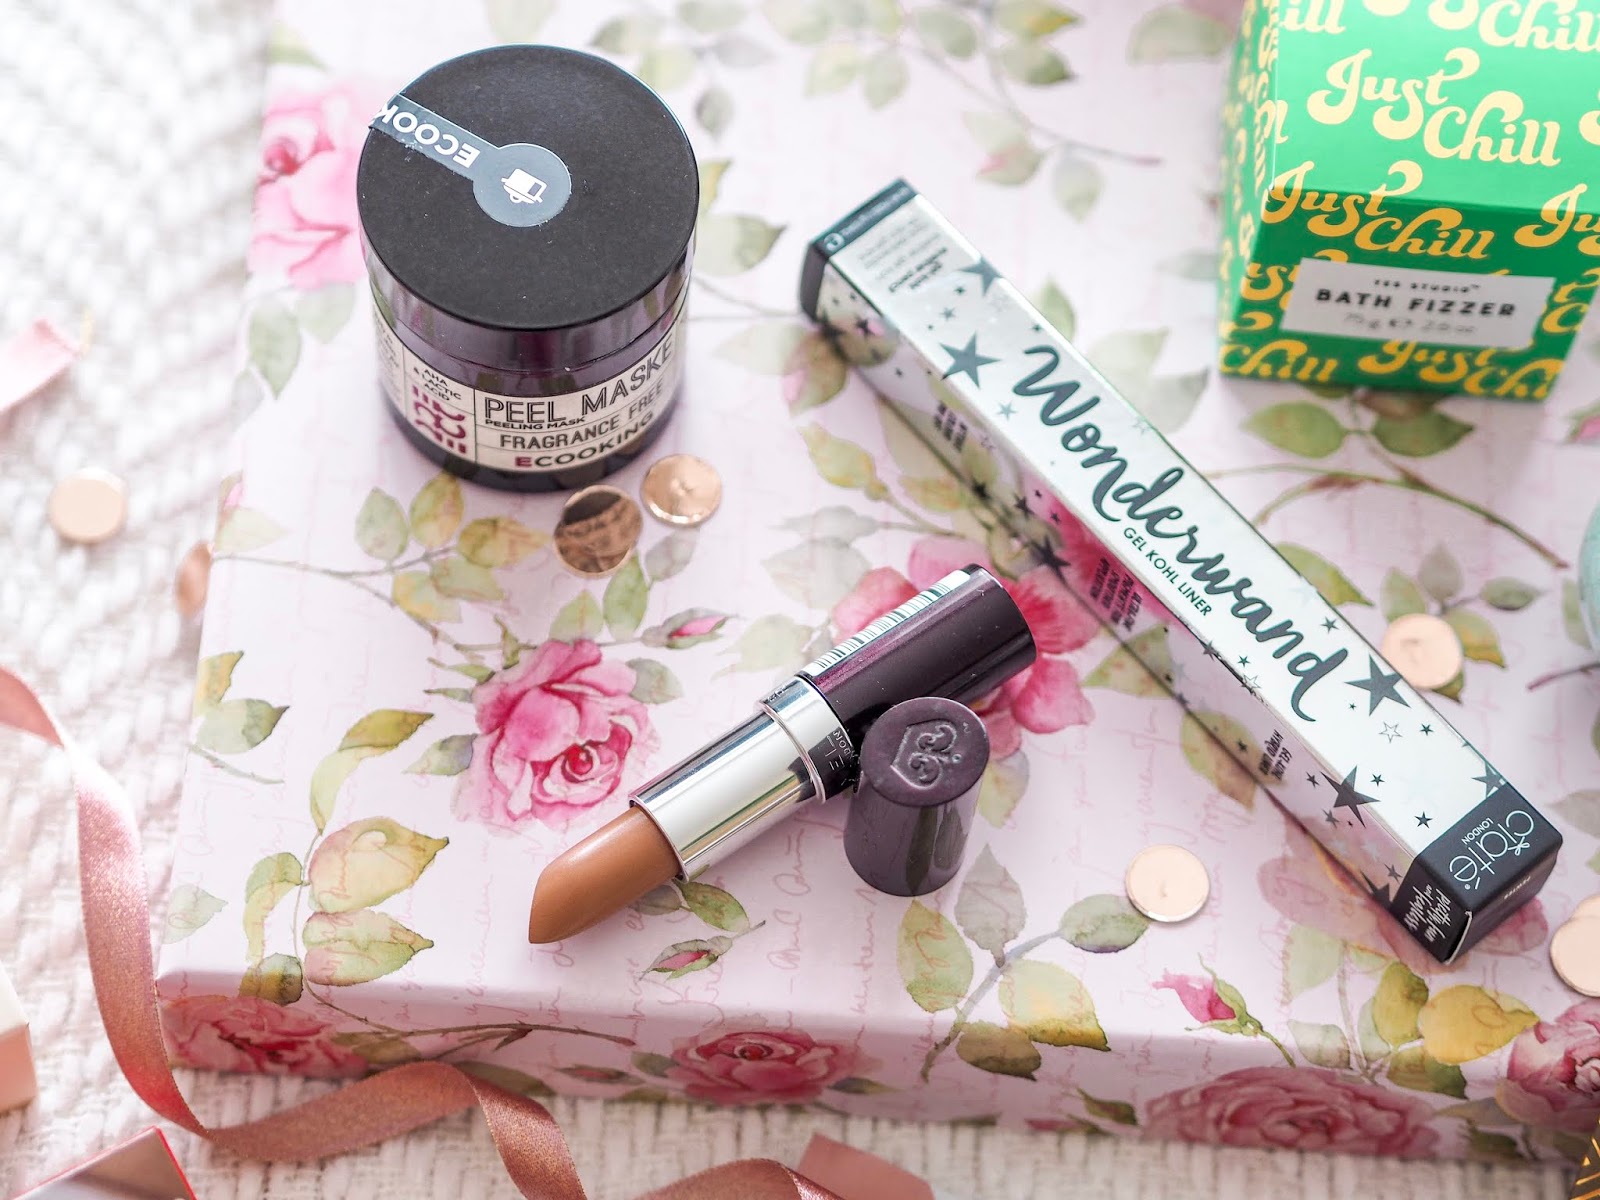 Mega May Day Giveaway!, UK Blogger, UK Giveaway, Competition, Beauty Giveaway, Makeup Giveaway, Katie Kirk Loves, Make Up Blogger, Beauty Blogger, Win This, Prize Draw, Blogger Giveaway